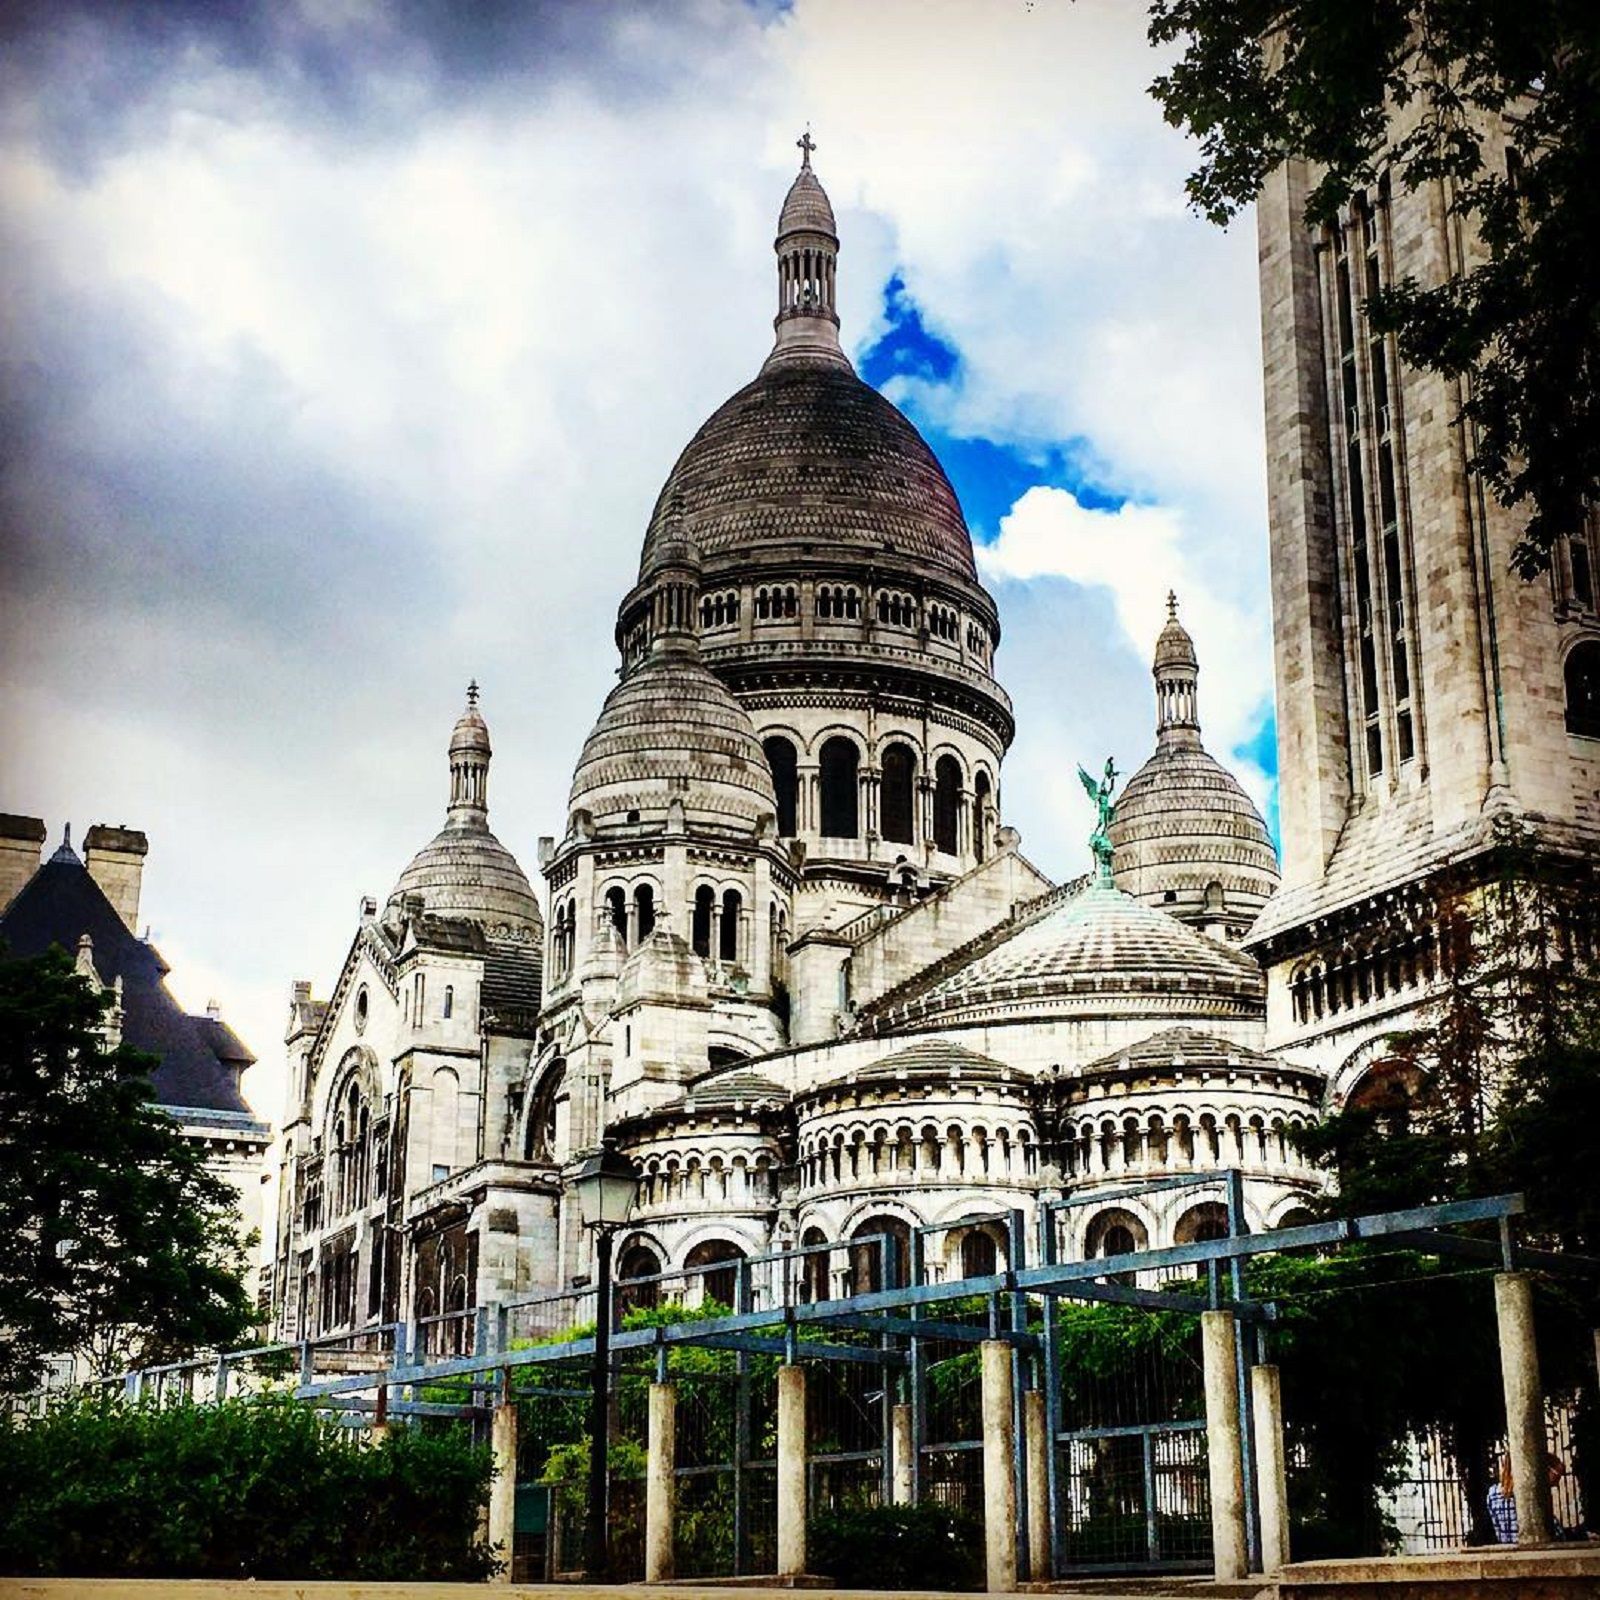 30 most instagrammed landmarks from around the world image 30